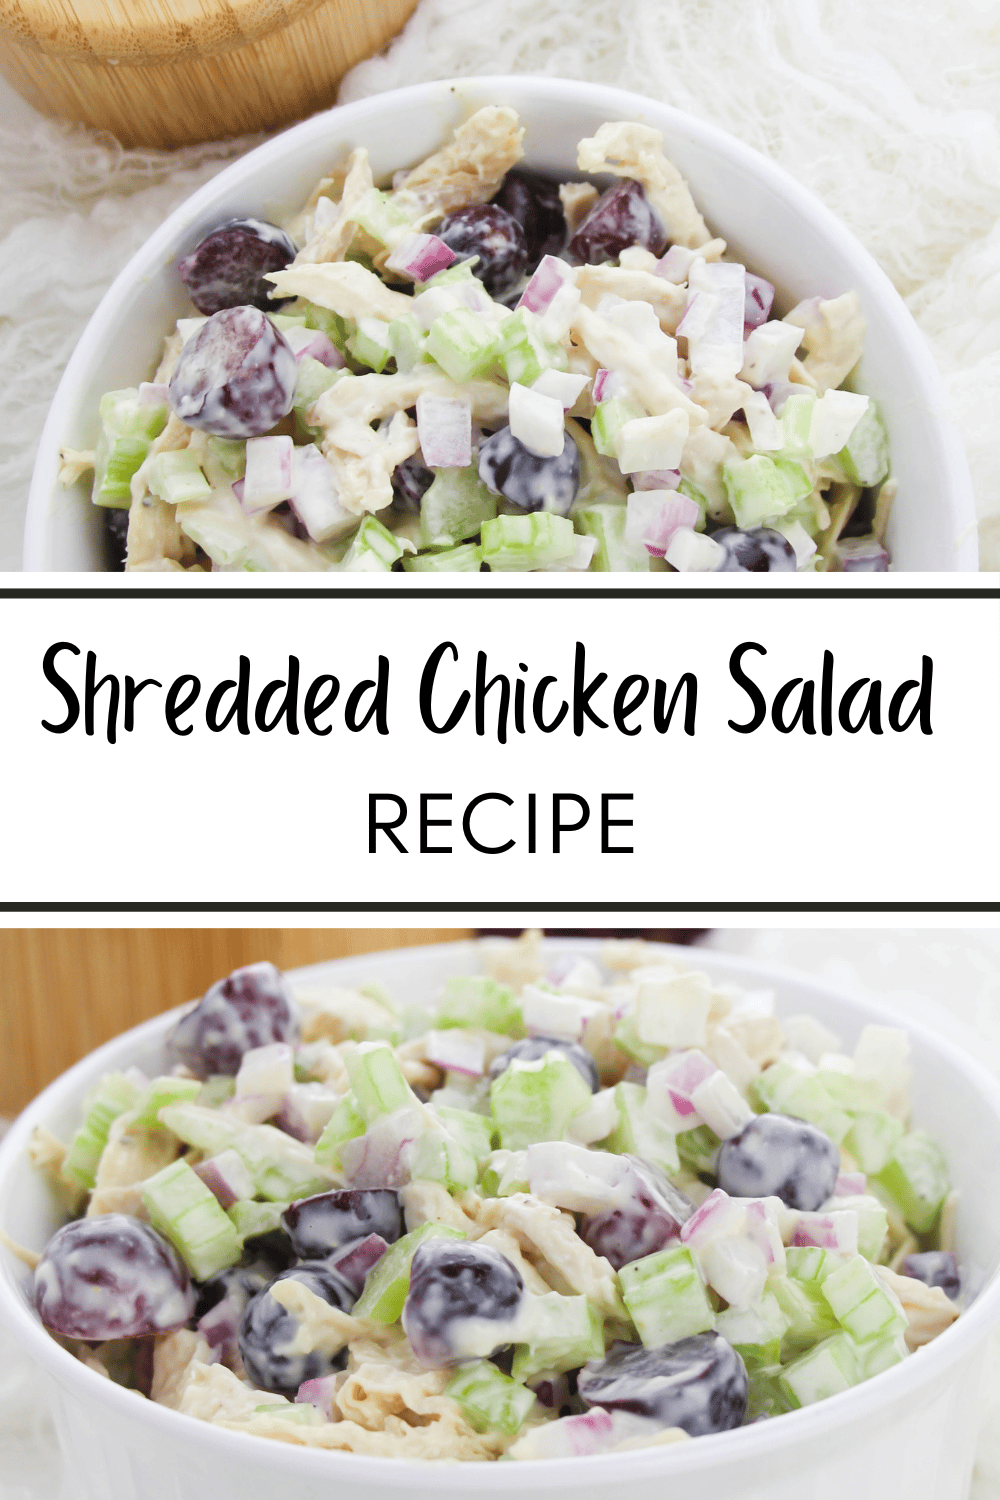 This Shredded Chicken Salad Recipe is a great way to enjoy a healthy and delicious lunch. It will become your favorite go-to lunch option. #shreddedchickensaladrecipe #shreddedchickensalad #chickensaladrecipe #chickensalad #lunchrecipe via @wondermomwannab